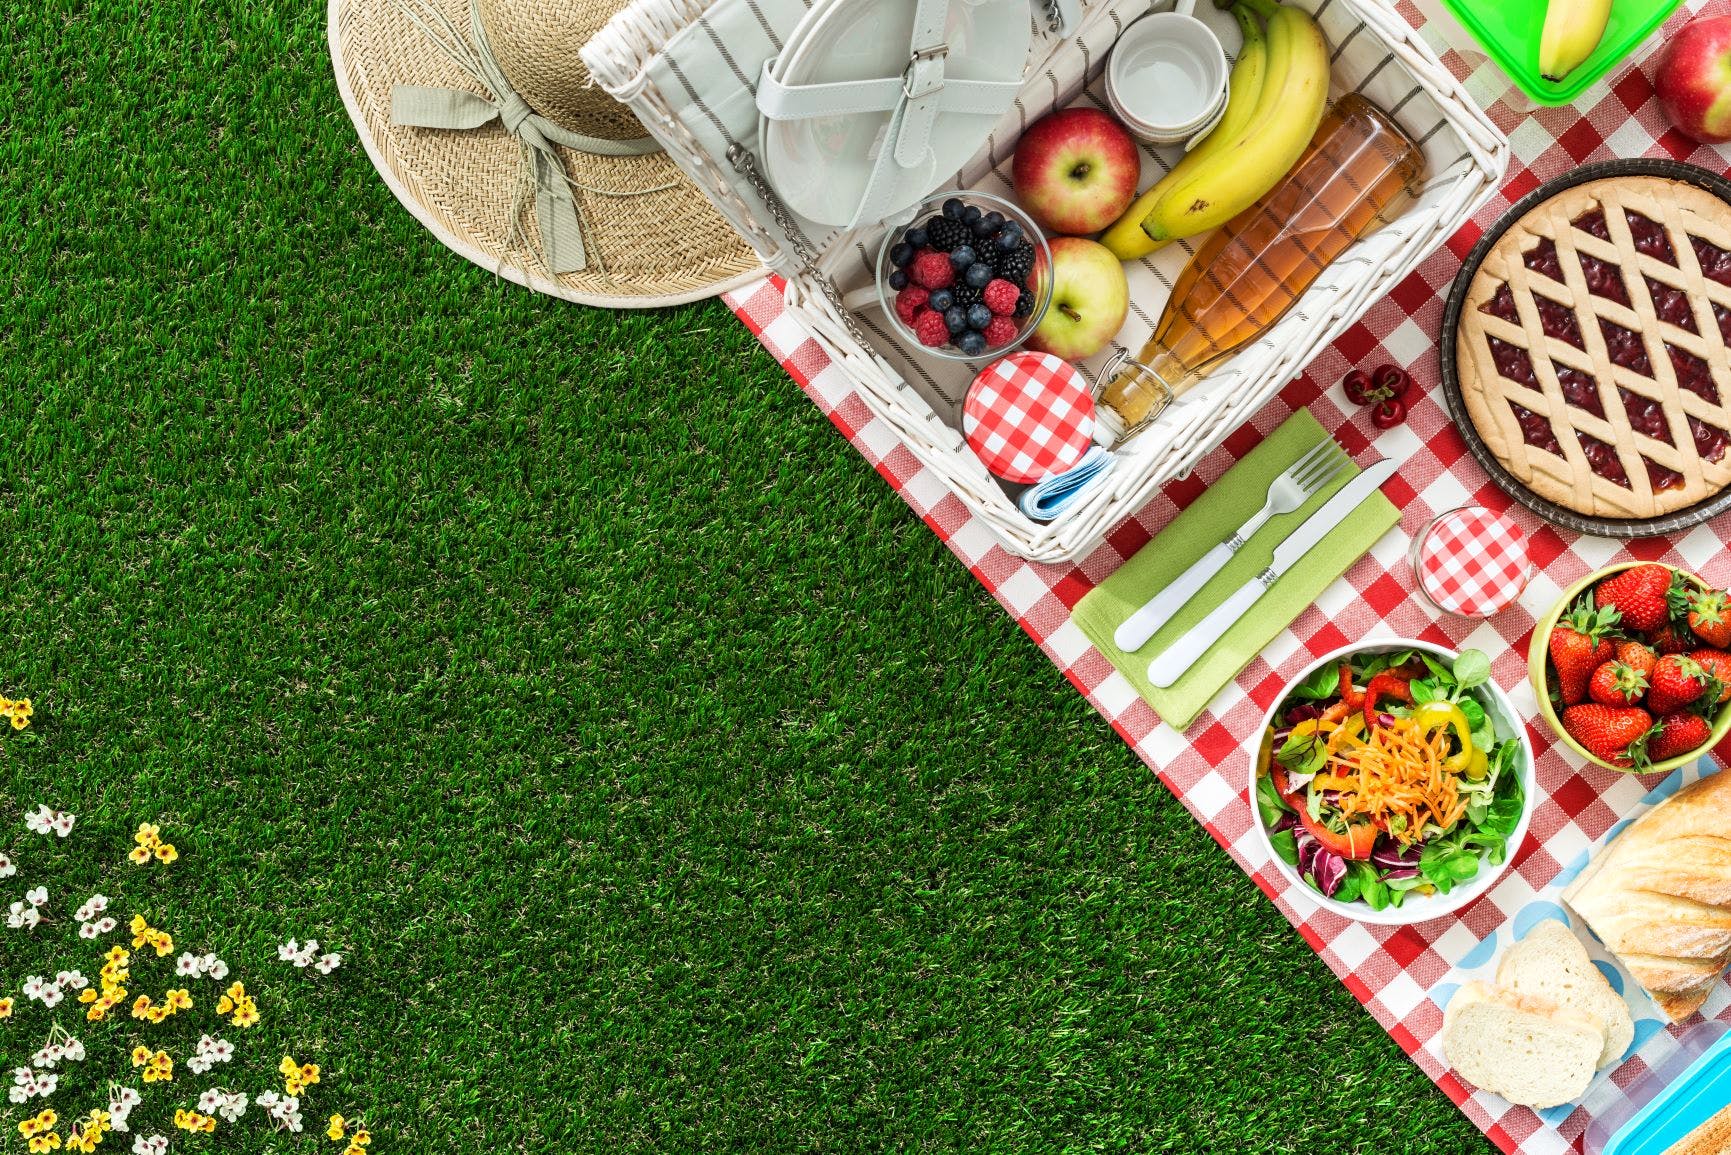 Image of picnic.ok 1 in 8 keys to designing and organizing your kitchen to avoid food infections - Cosentino